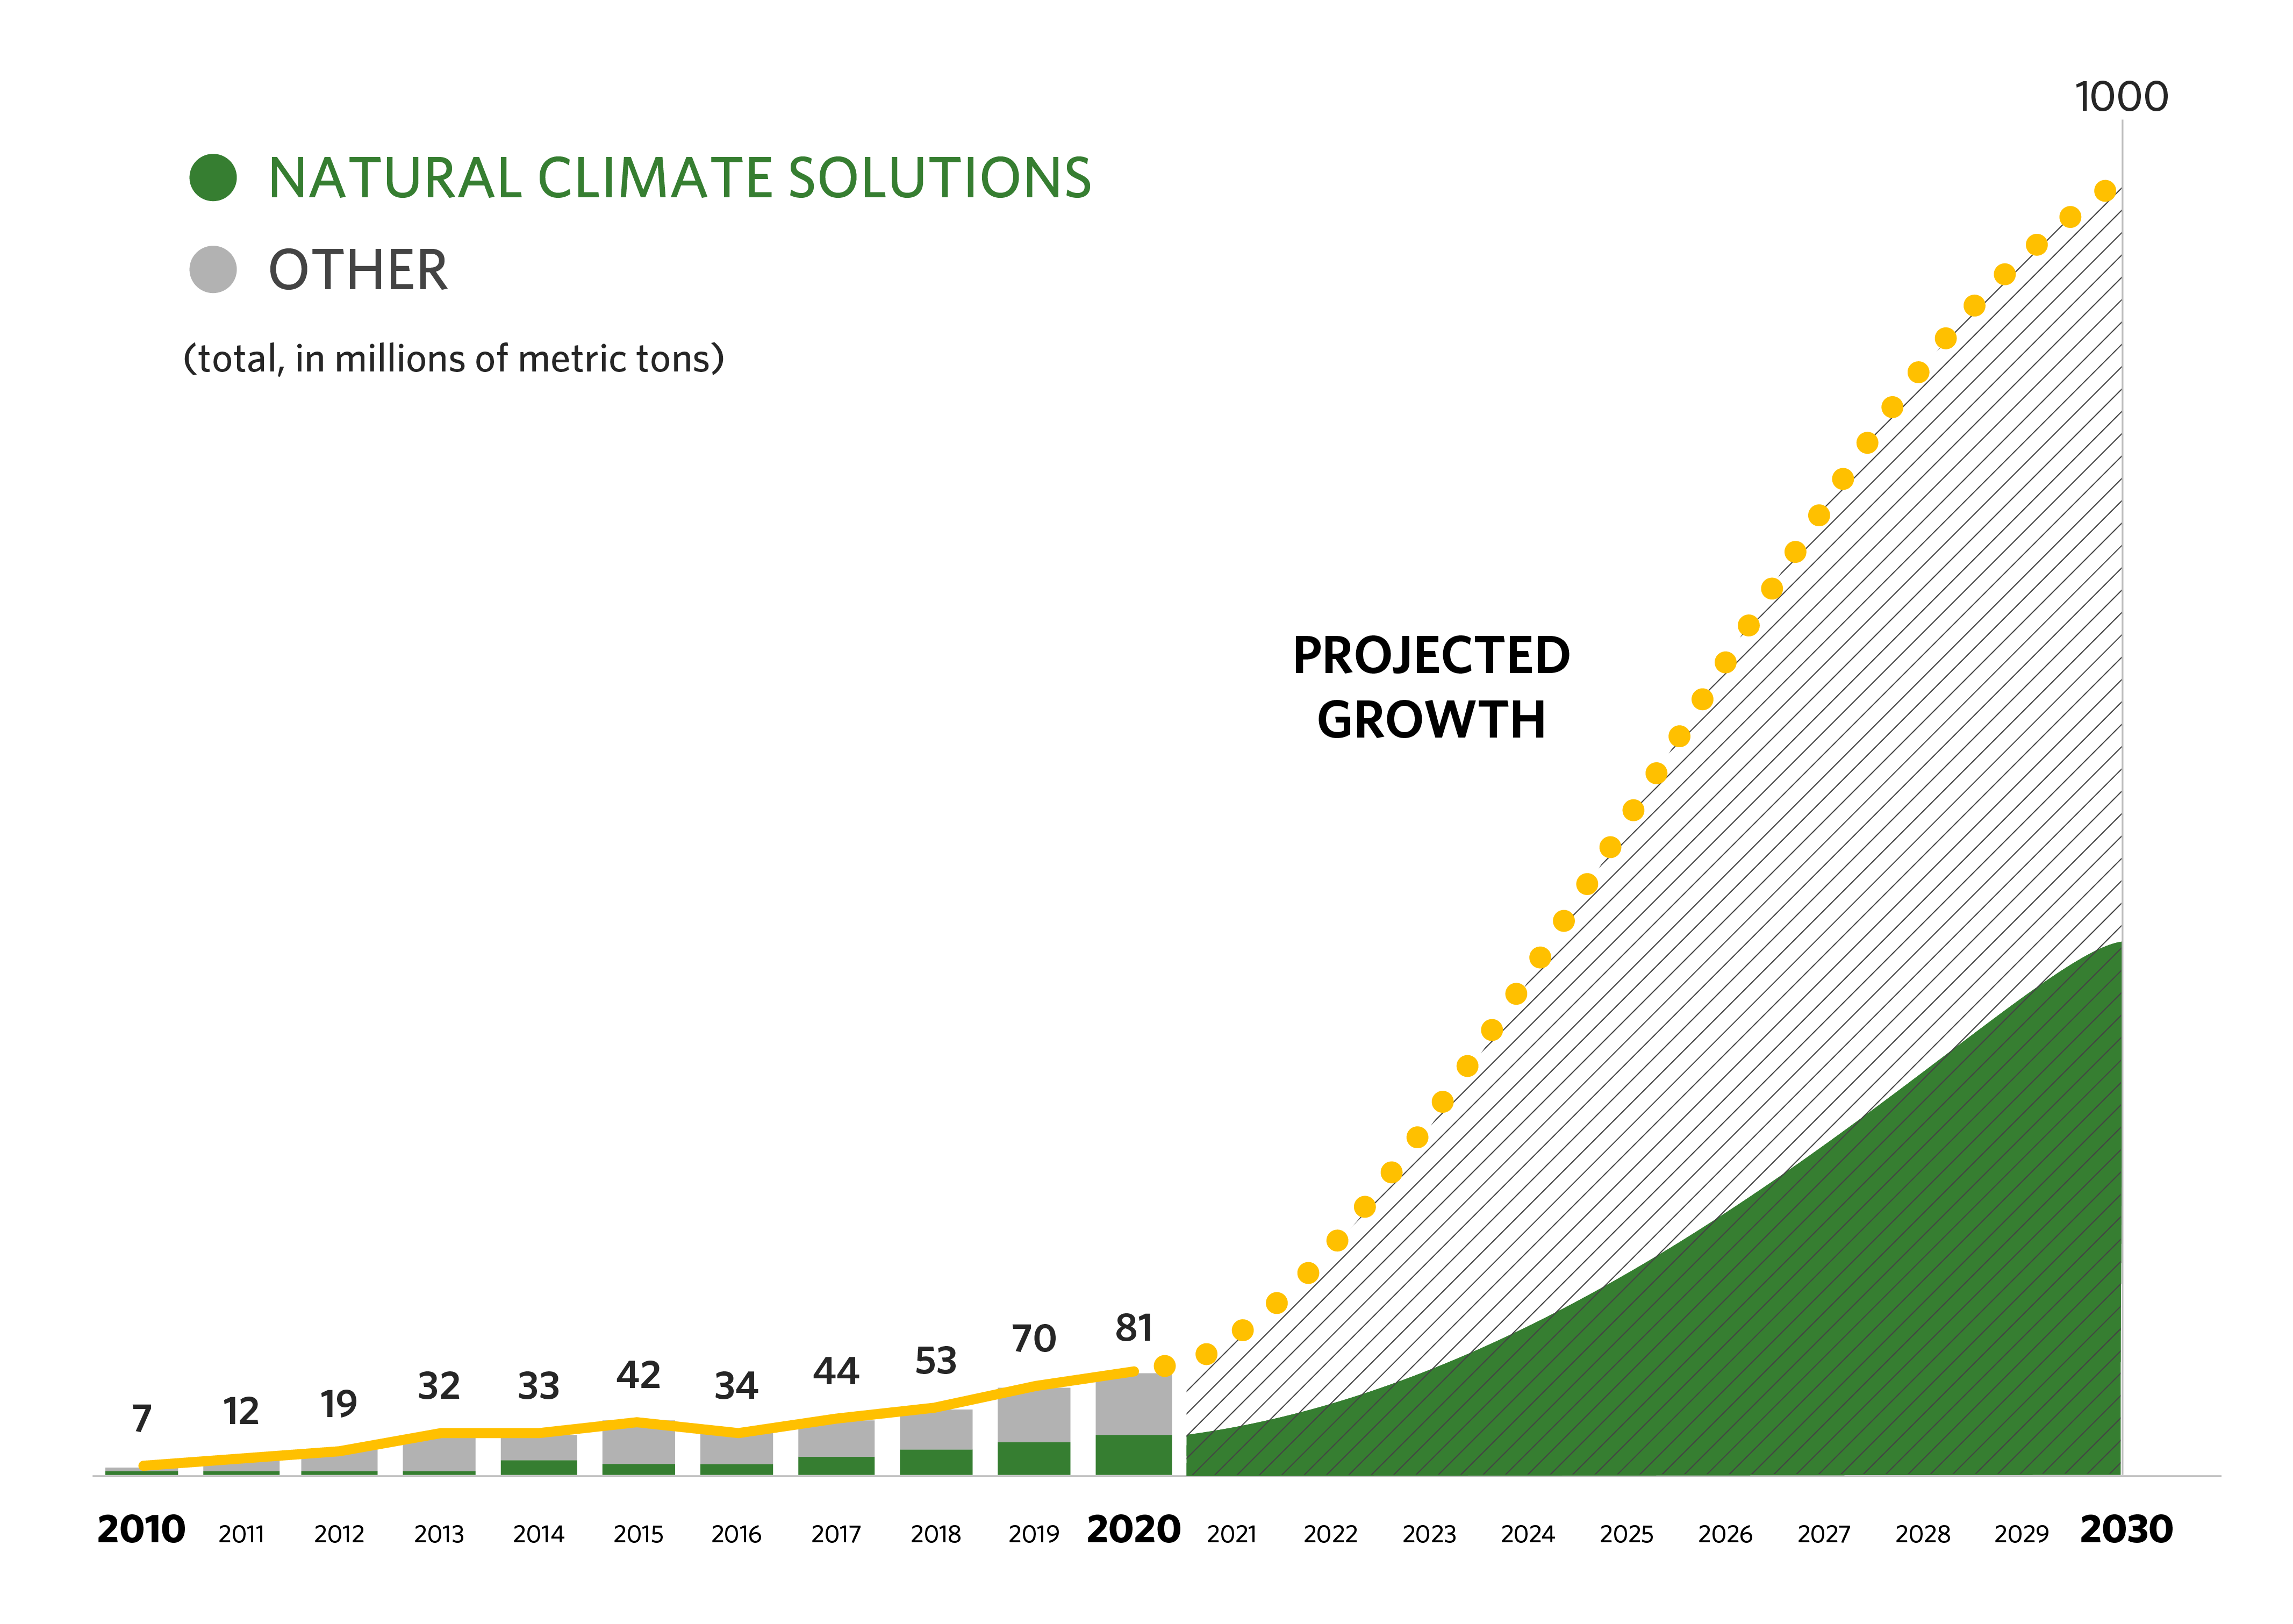 bar chart showing growth of natural climate solutions and other carbon markets from 2010 through a projected 2030, with a large spike of projected growth happening from 2020 to 2030